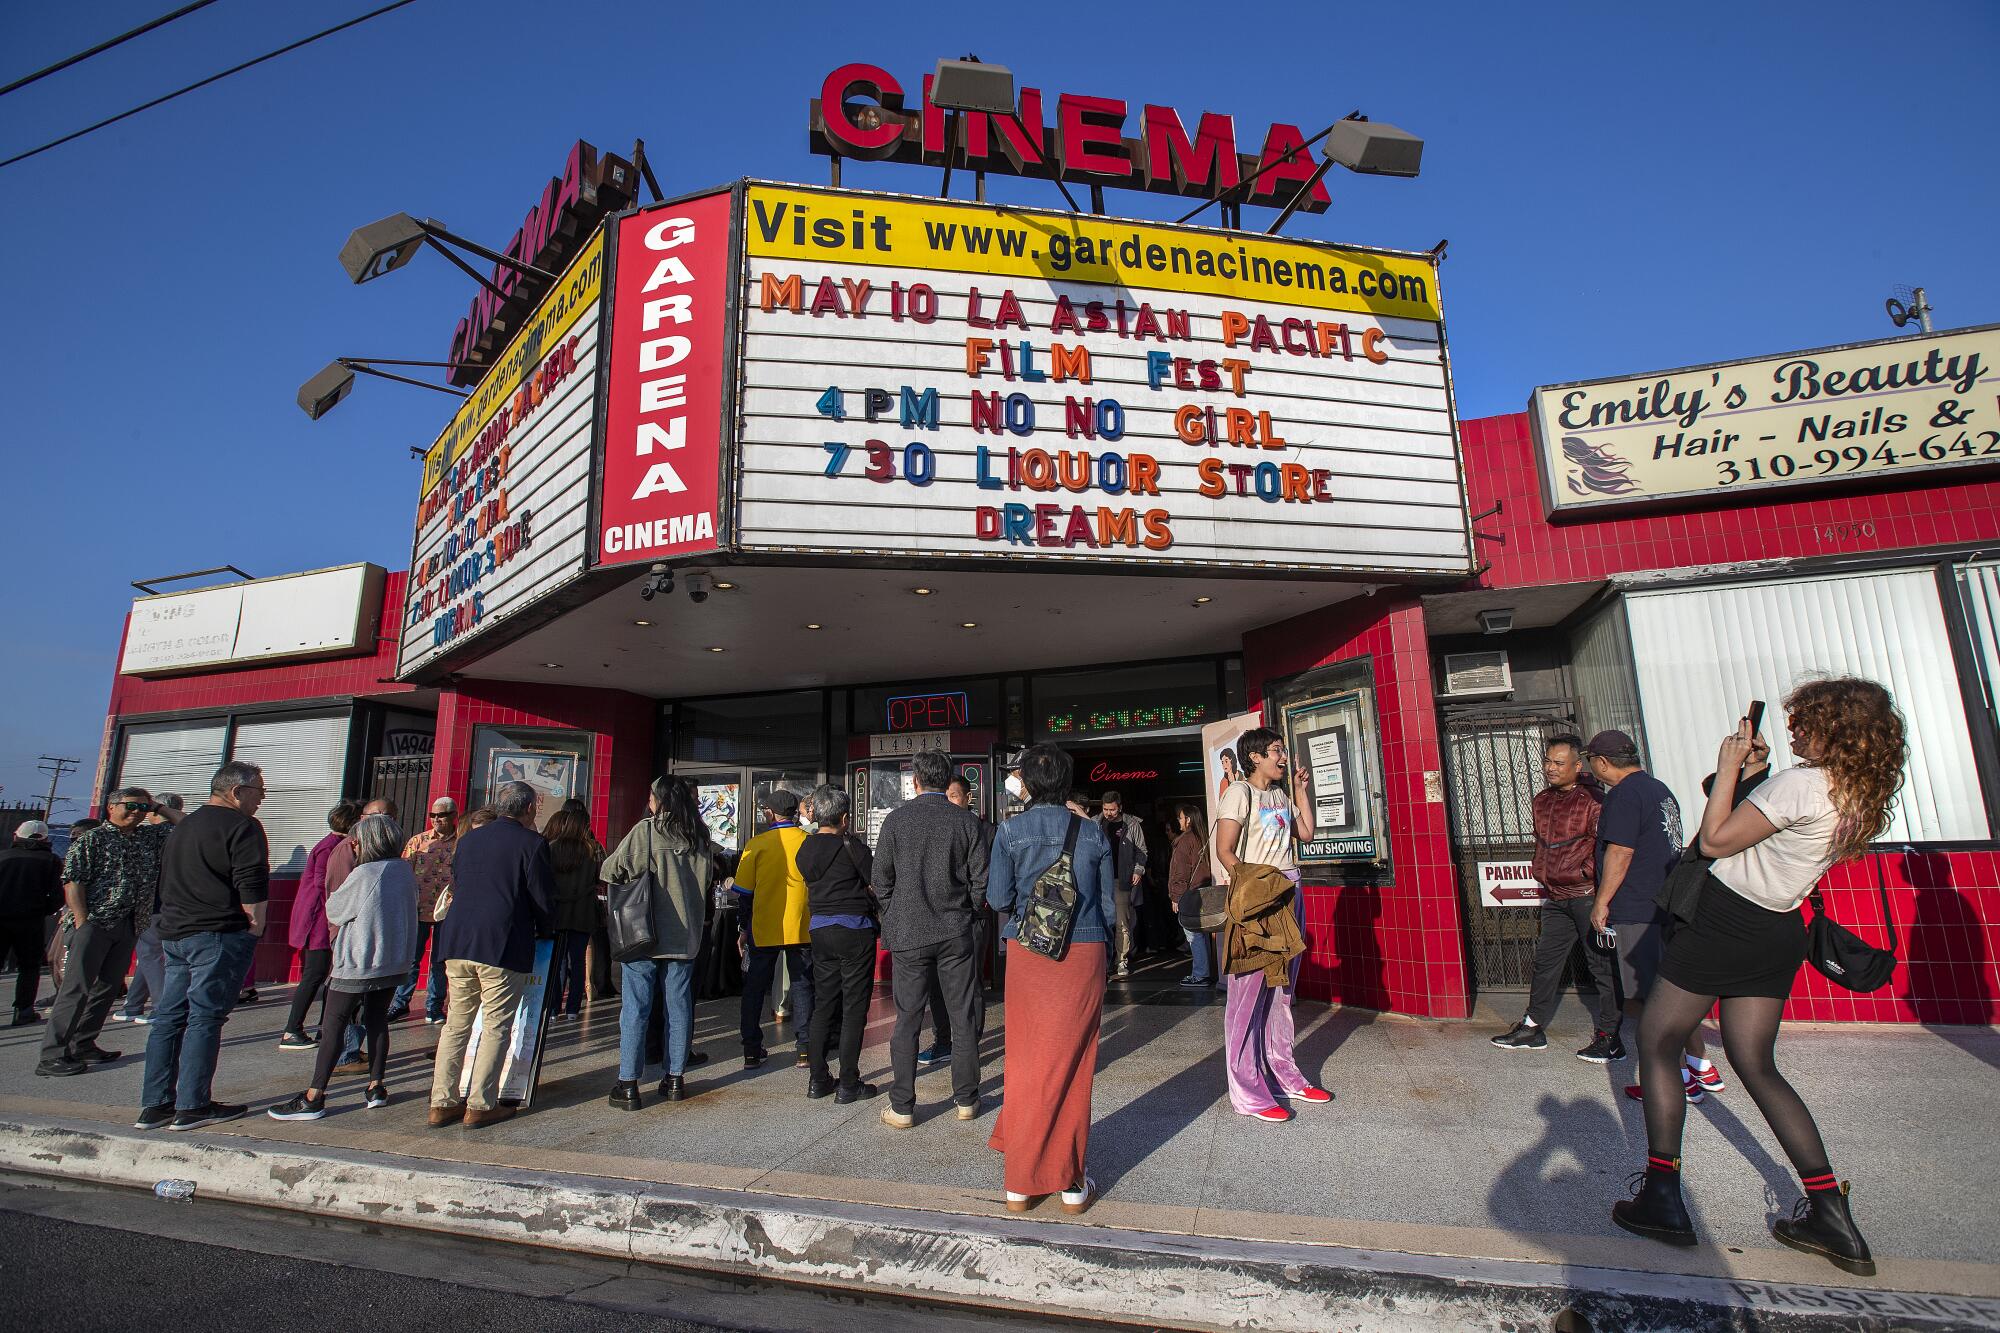 People stand on the sidewalk outside a small movie theater with an old-fashioned marquee